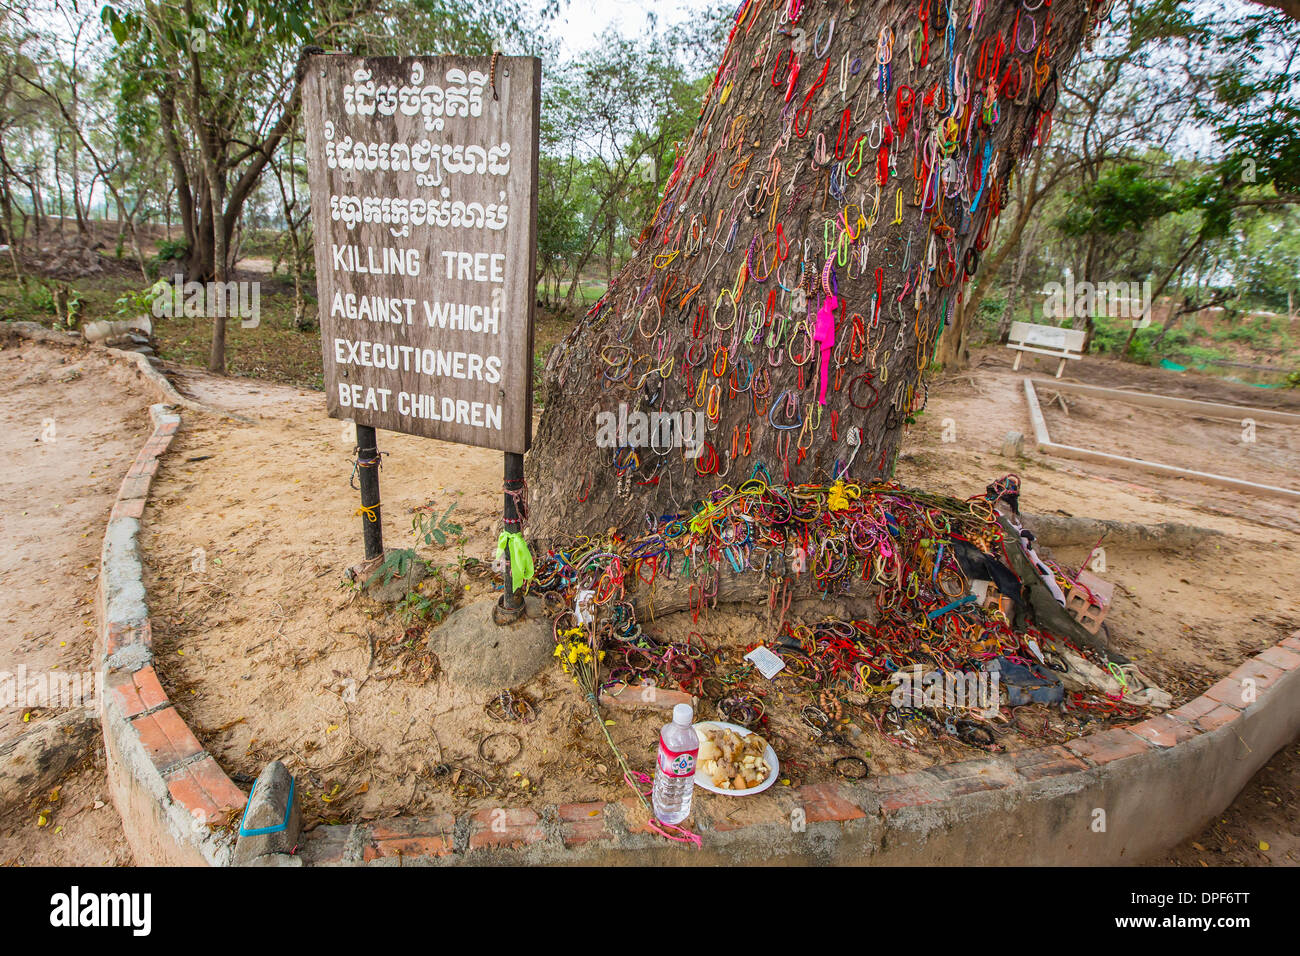 Killing Tree at the Killing Fields of Choueng Ek, child victims under the Khmer Rouge, Phnom Penh, Cambodia Stock Photo